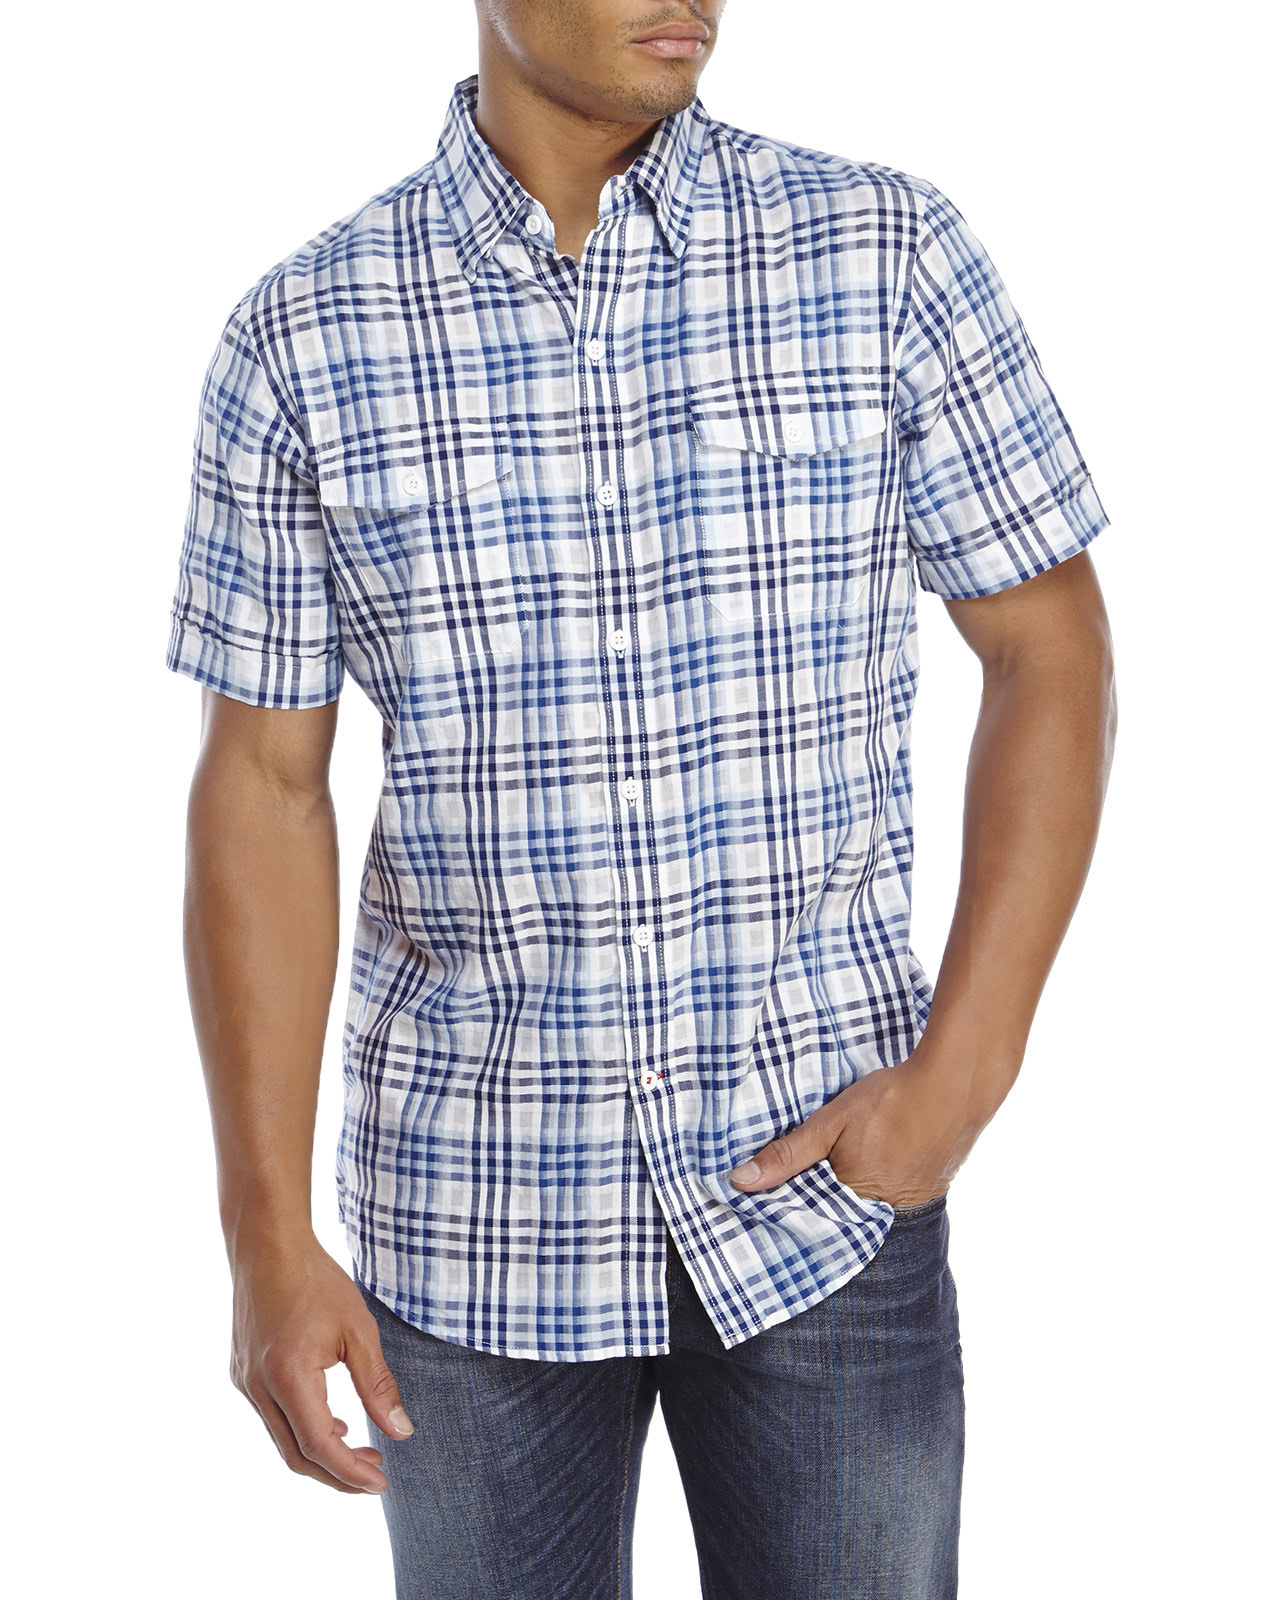 Lyst - Izod Blue Woven Plaid Shirt in Blue for Men